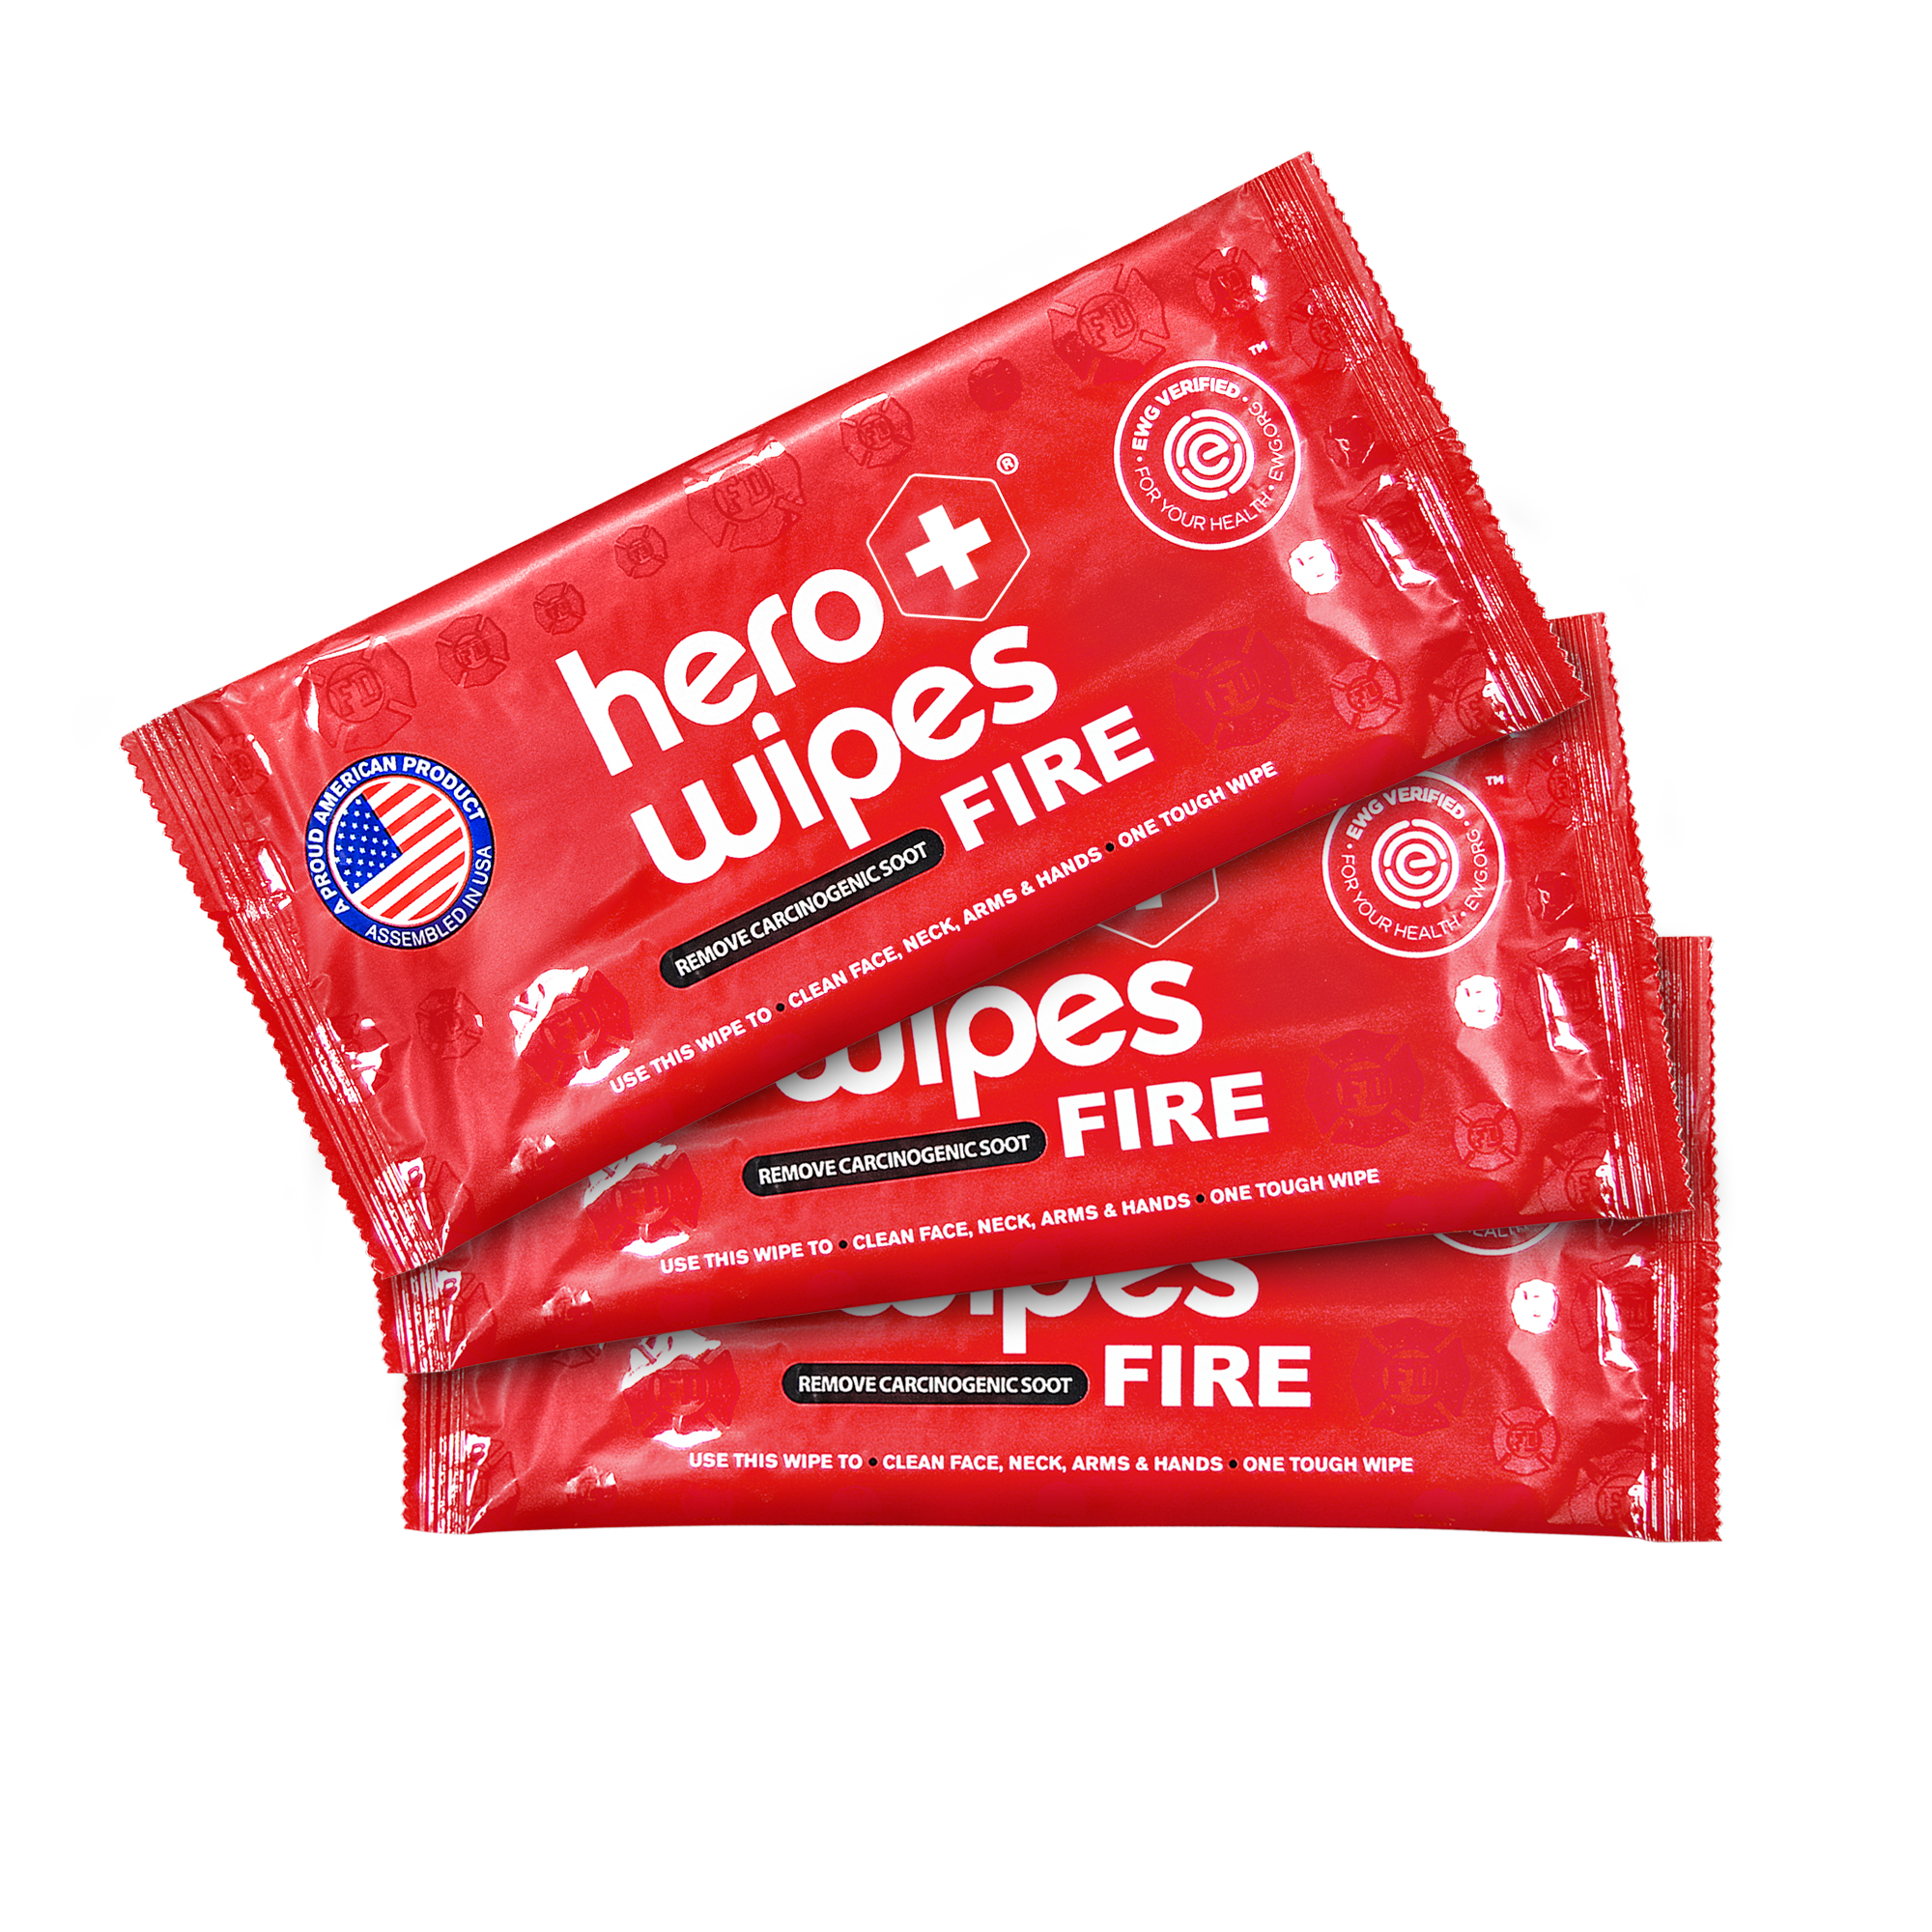 Hero Wipes® -XL Body Wipes Individually Wrapped Wipes (120 Wipes per Case)